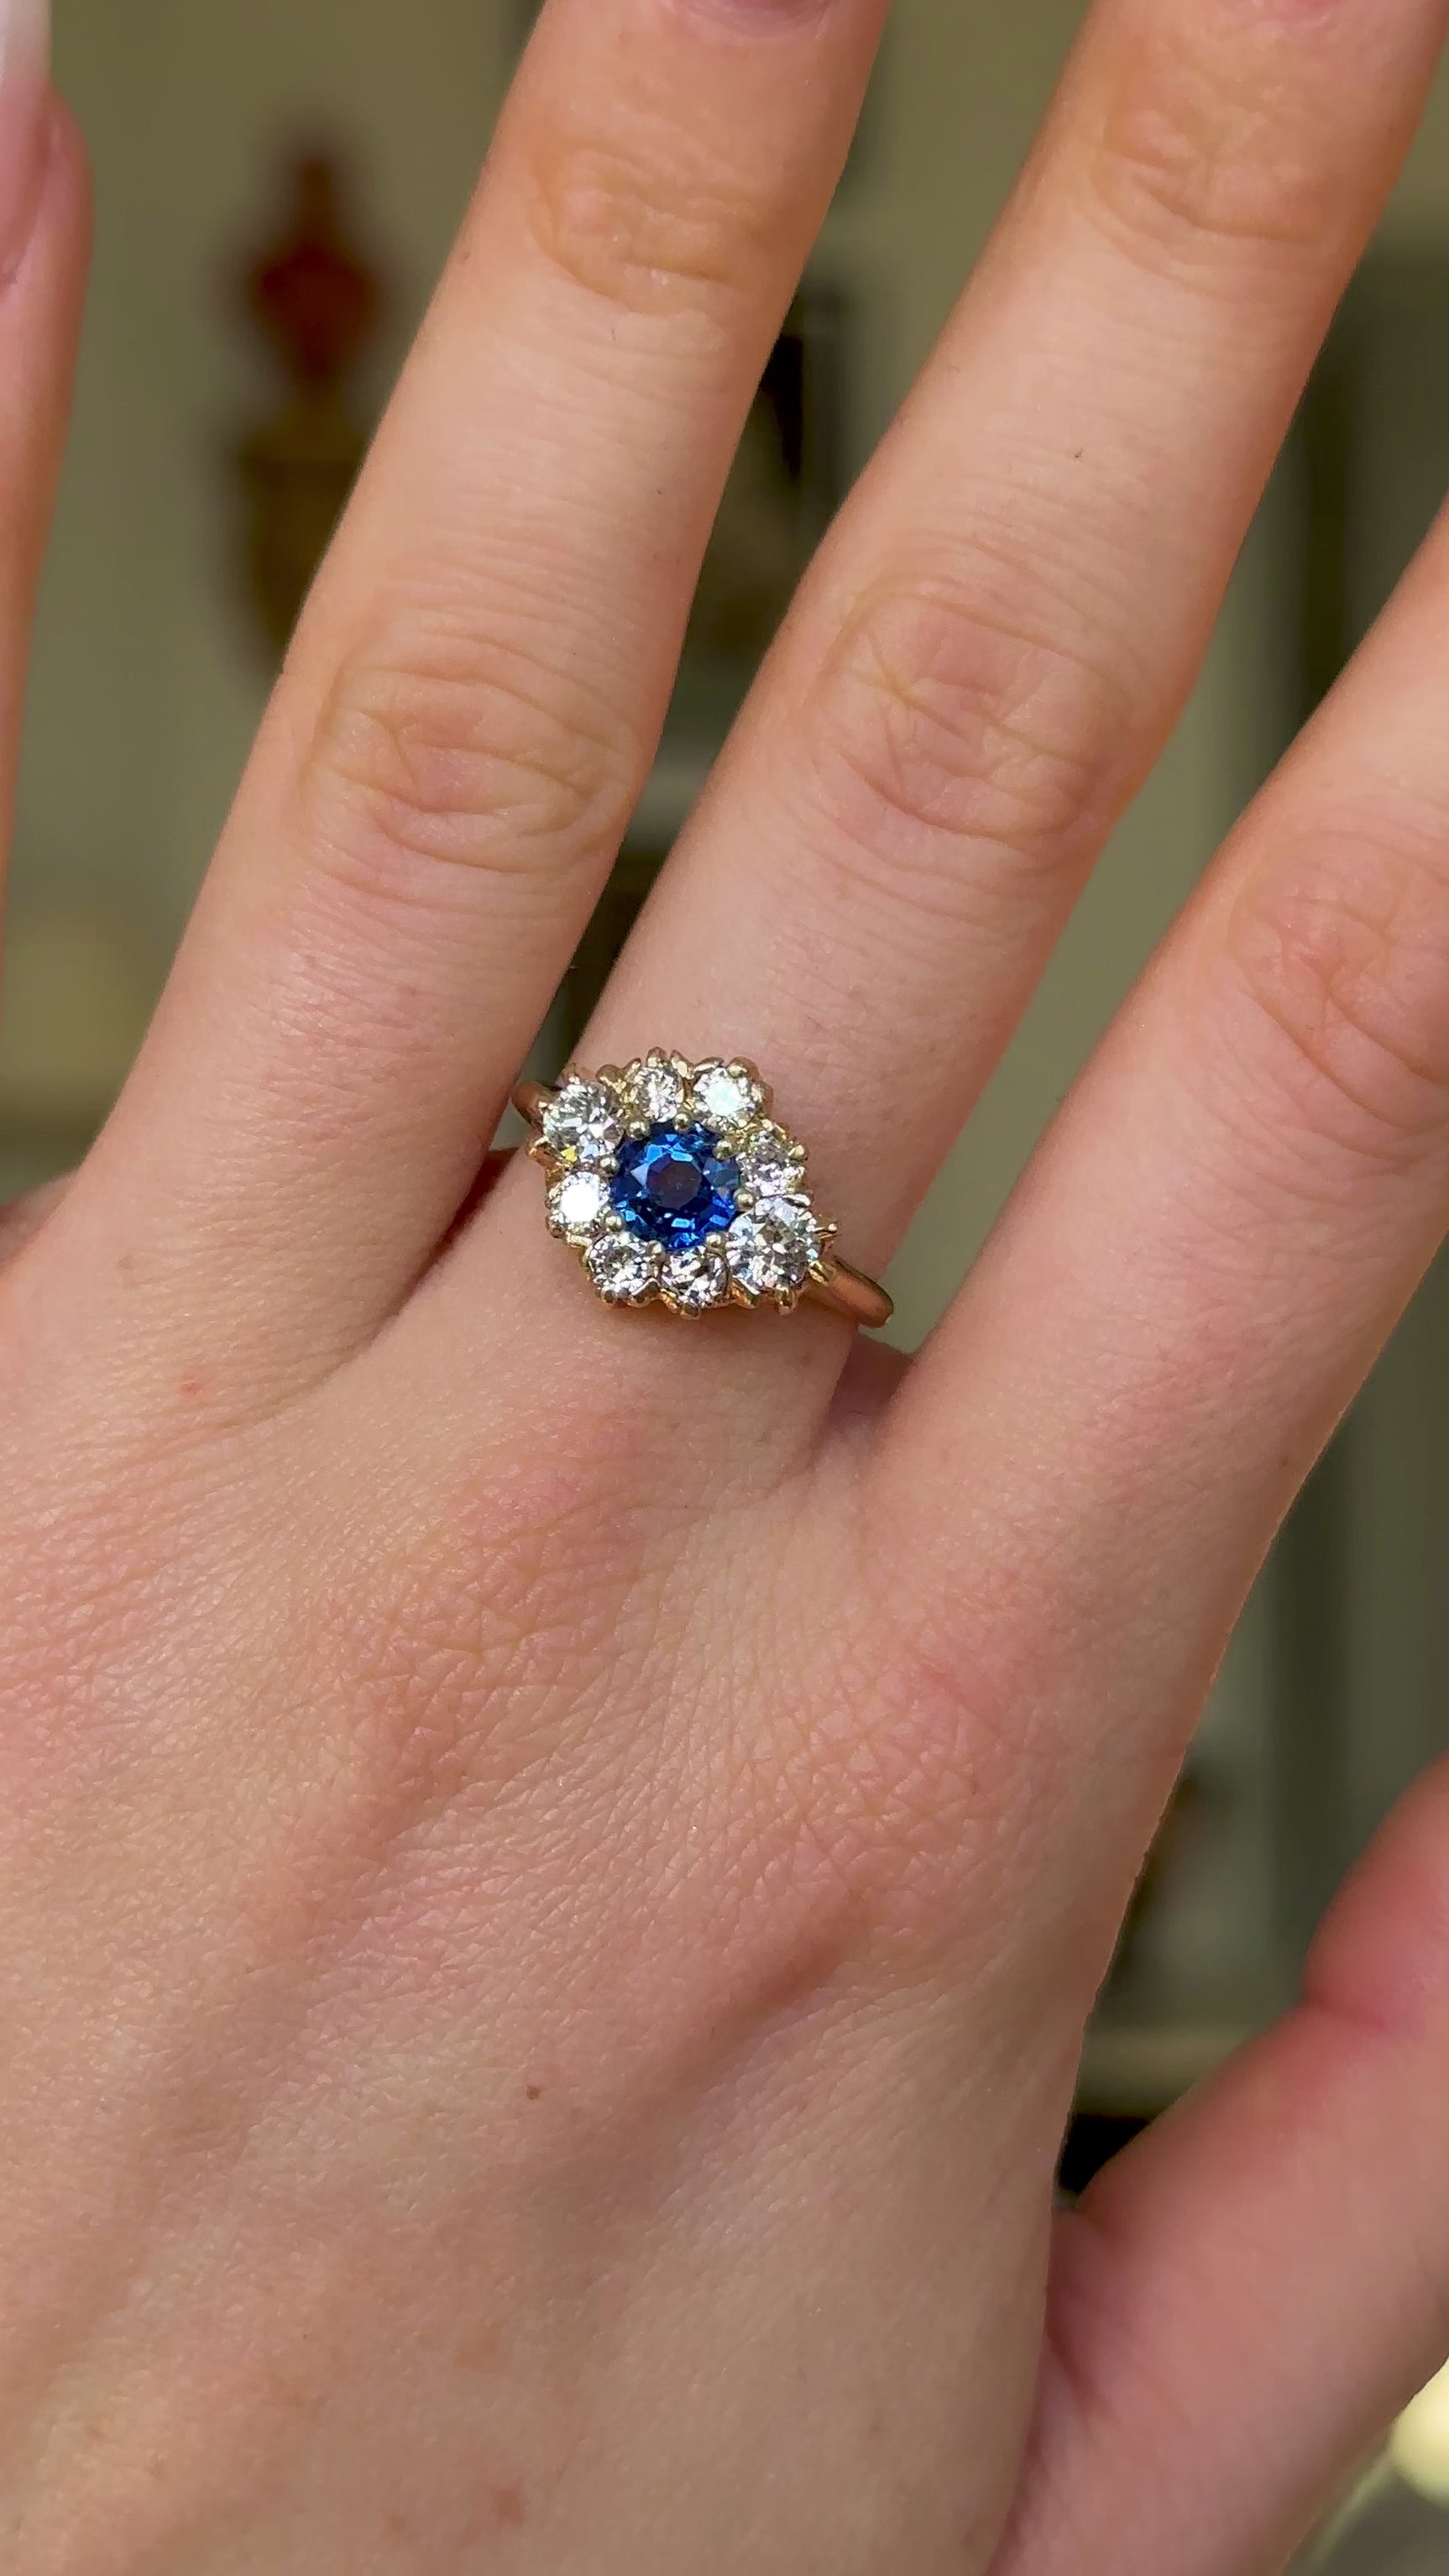 Vintage, Sapphire and Diamond Cluster Engagement Ring, 14ct Yellow Gold worn on hand and moved around to give perspective